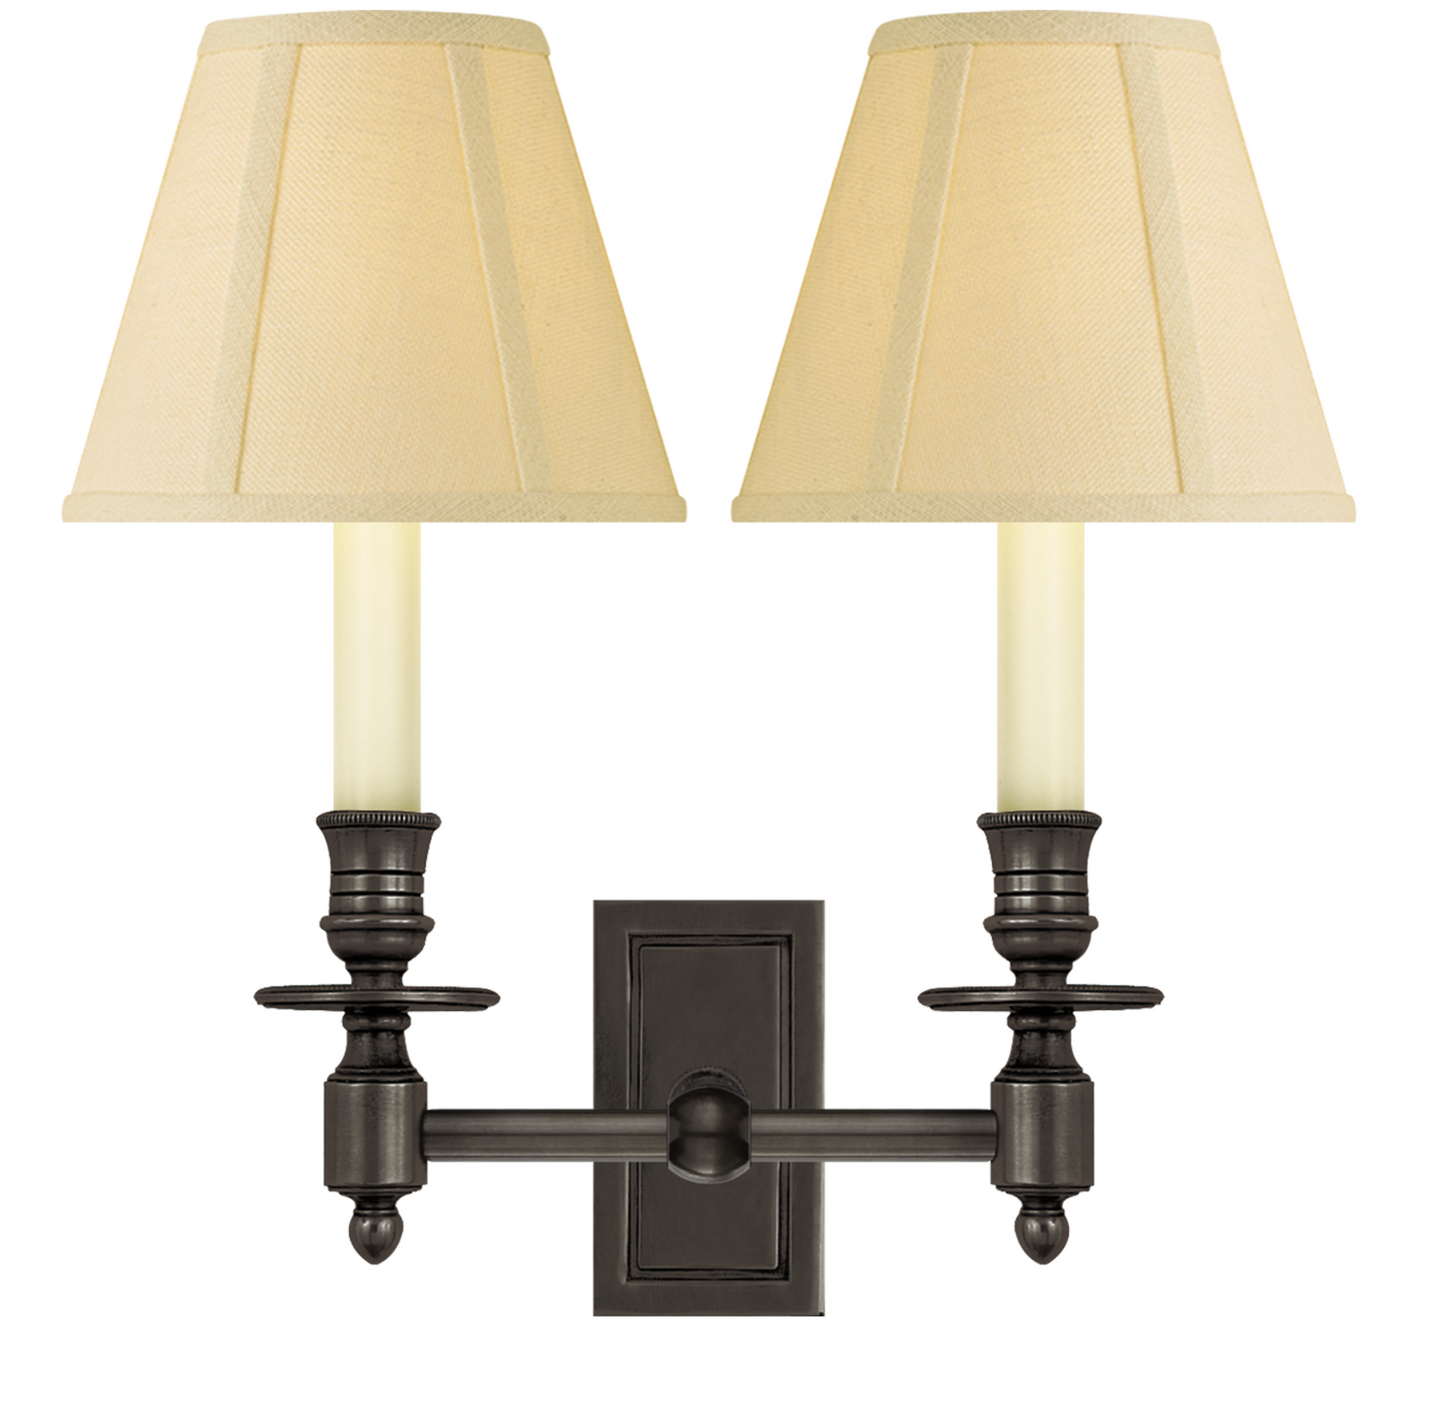 Studio VC French Double Library Sconce S2212 OPEN BOX